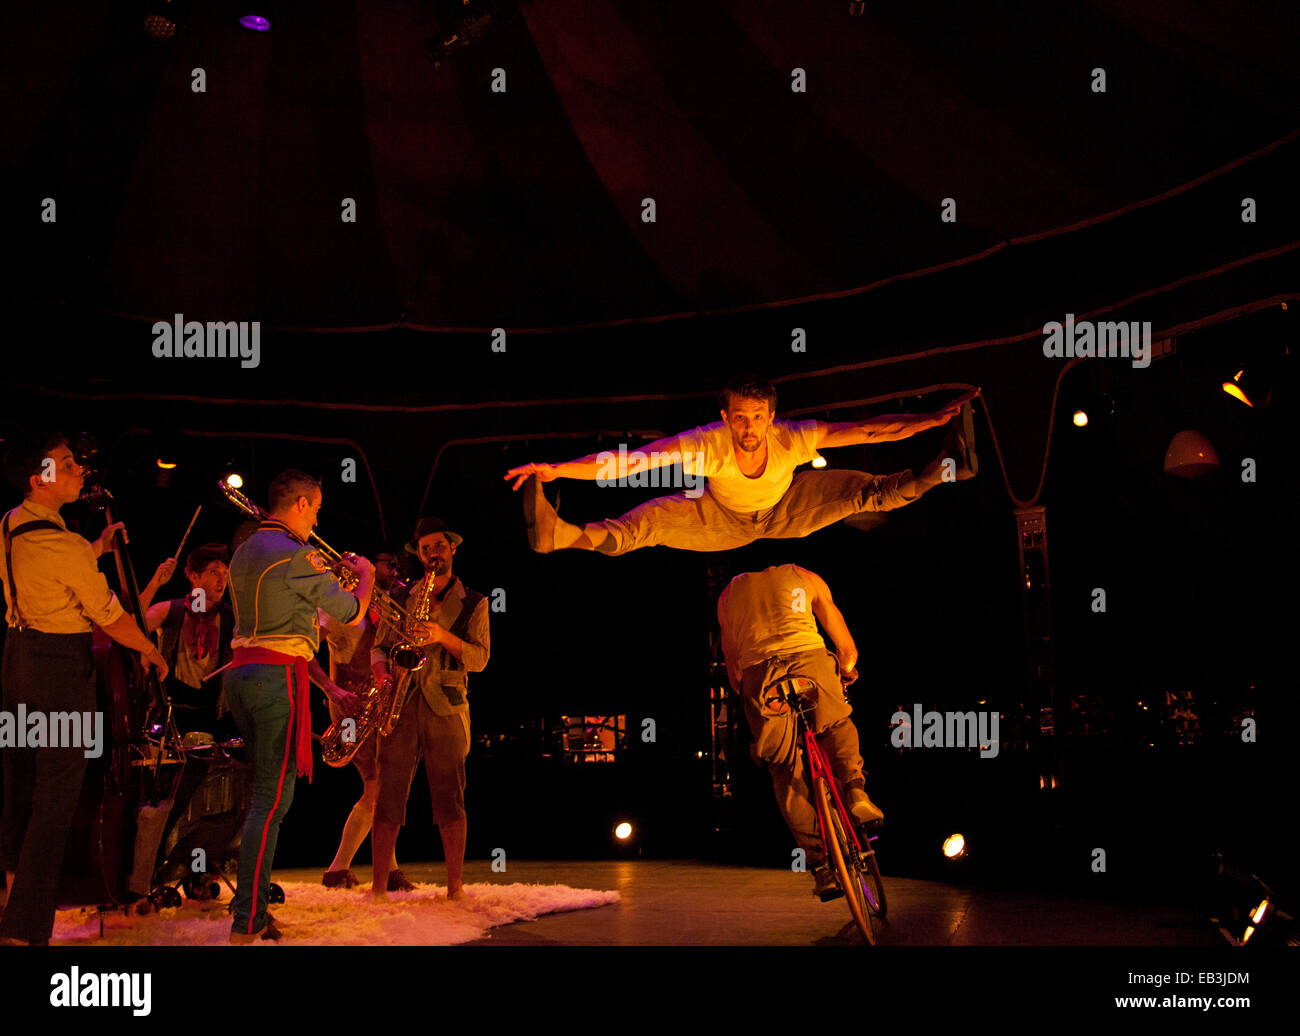 Edinburgh, St Andrew Square, Scotland. 25th Nov. 2014 Scotch and Soda – photo-call. The headline circus act at this years Edinburgh's Christmas. The company will present three set pieces from the show that has its European premier on Wed 26th November. Stock Photo